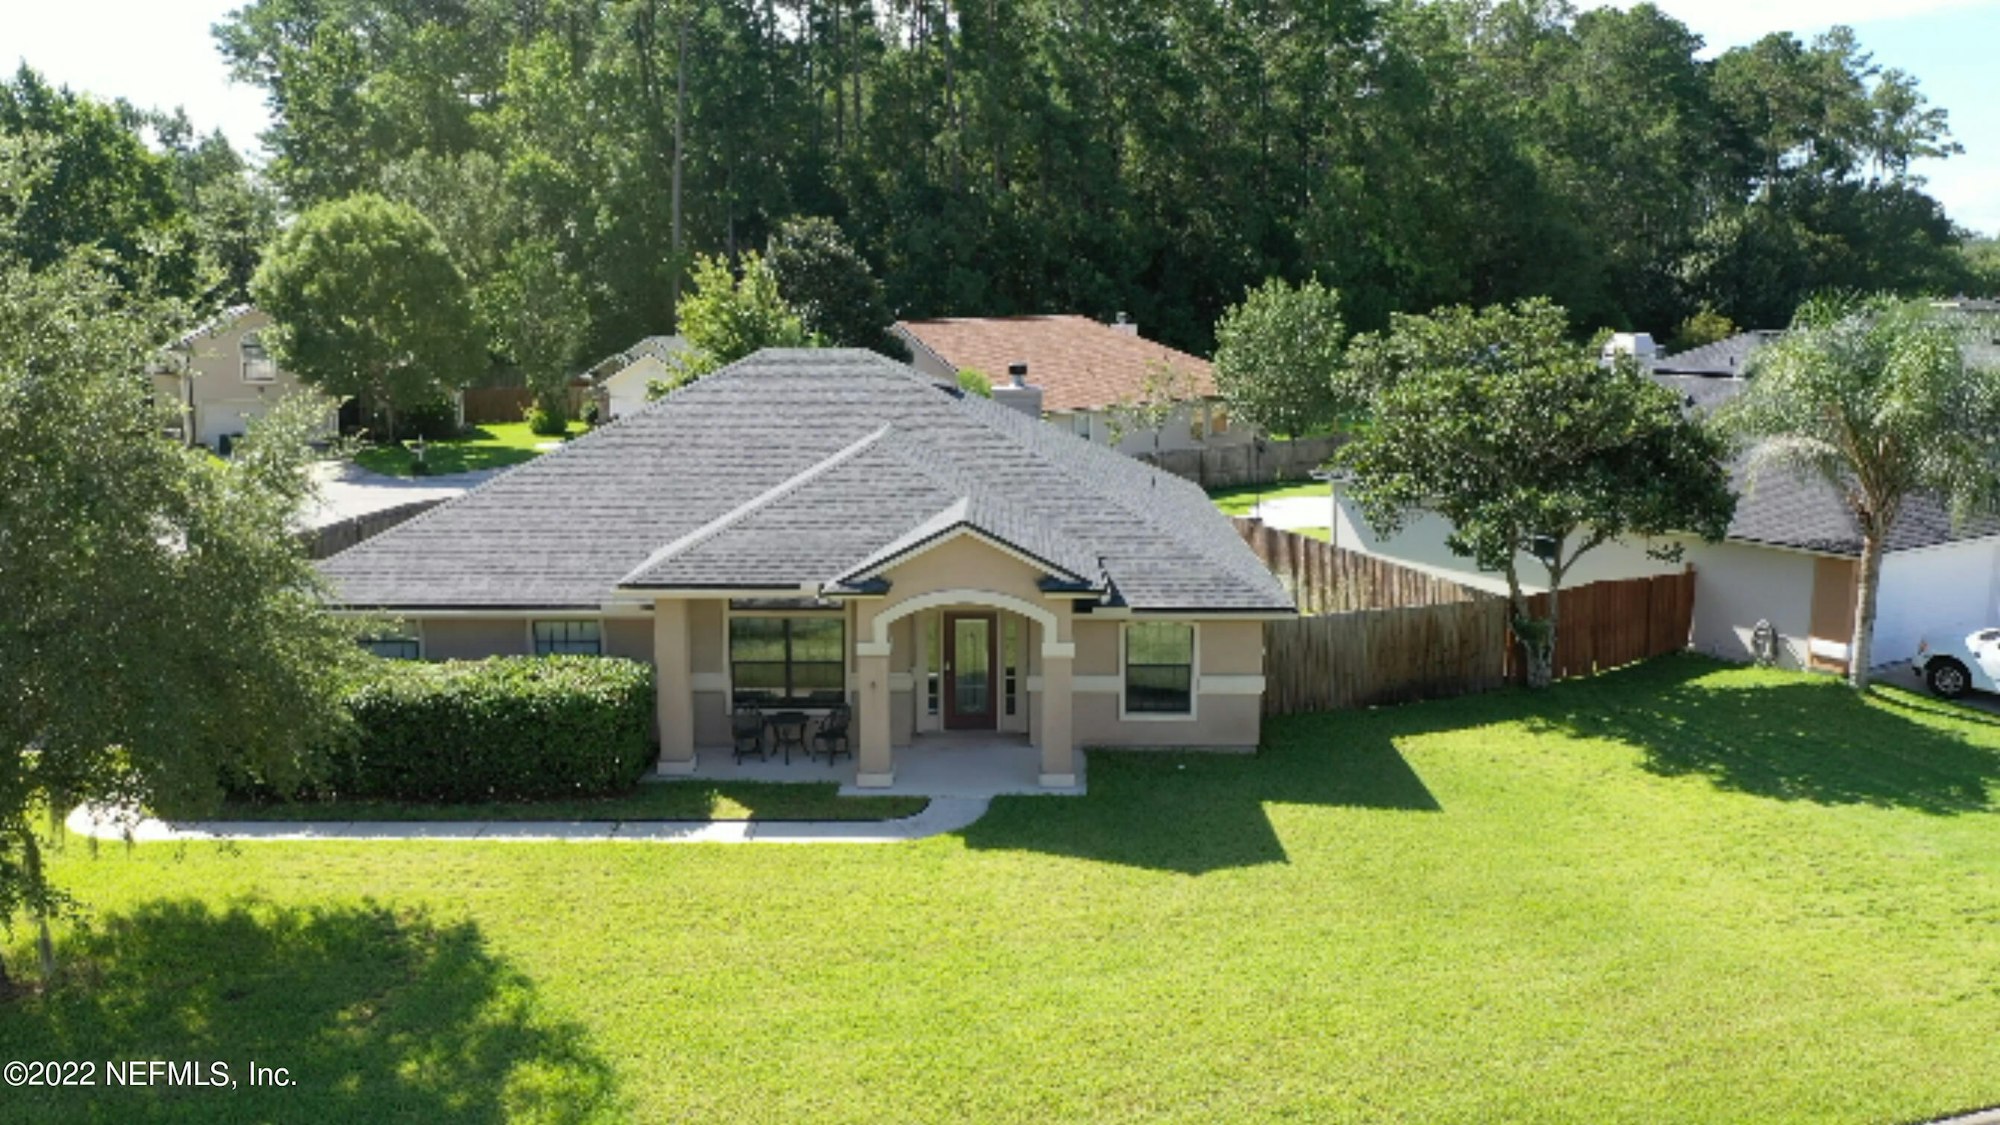 Photo 1 of 25 - 4038 Old Plank Rd, Middleburg, FL 32068